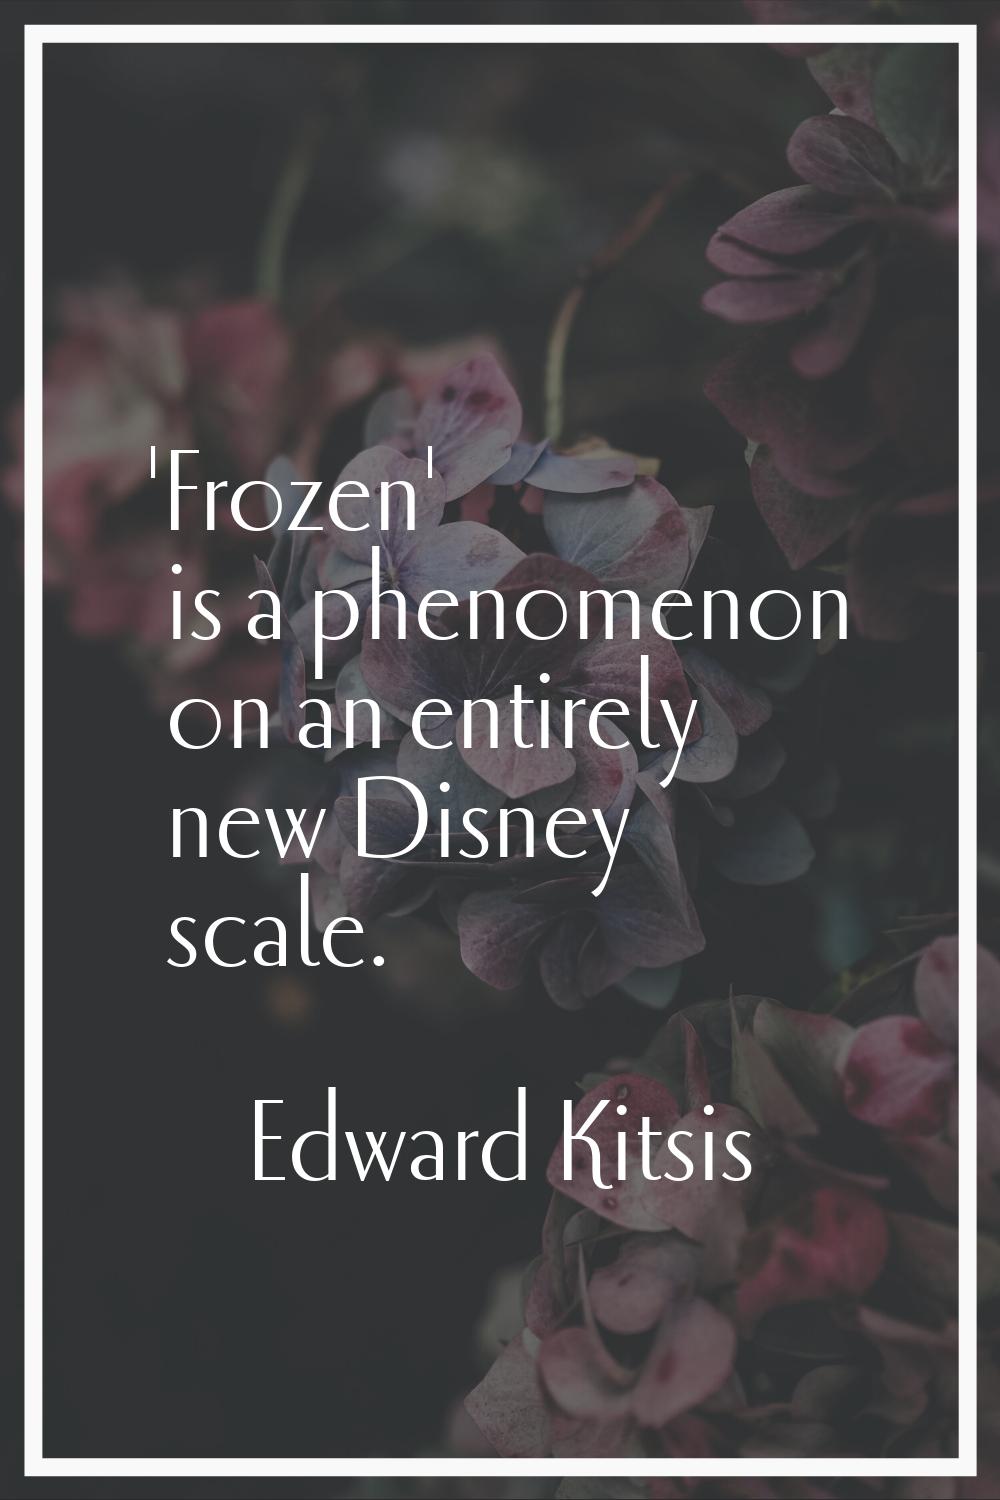 'Frozen' is a phenomenon on an entirely new Disney scale.